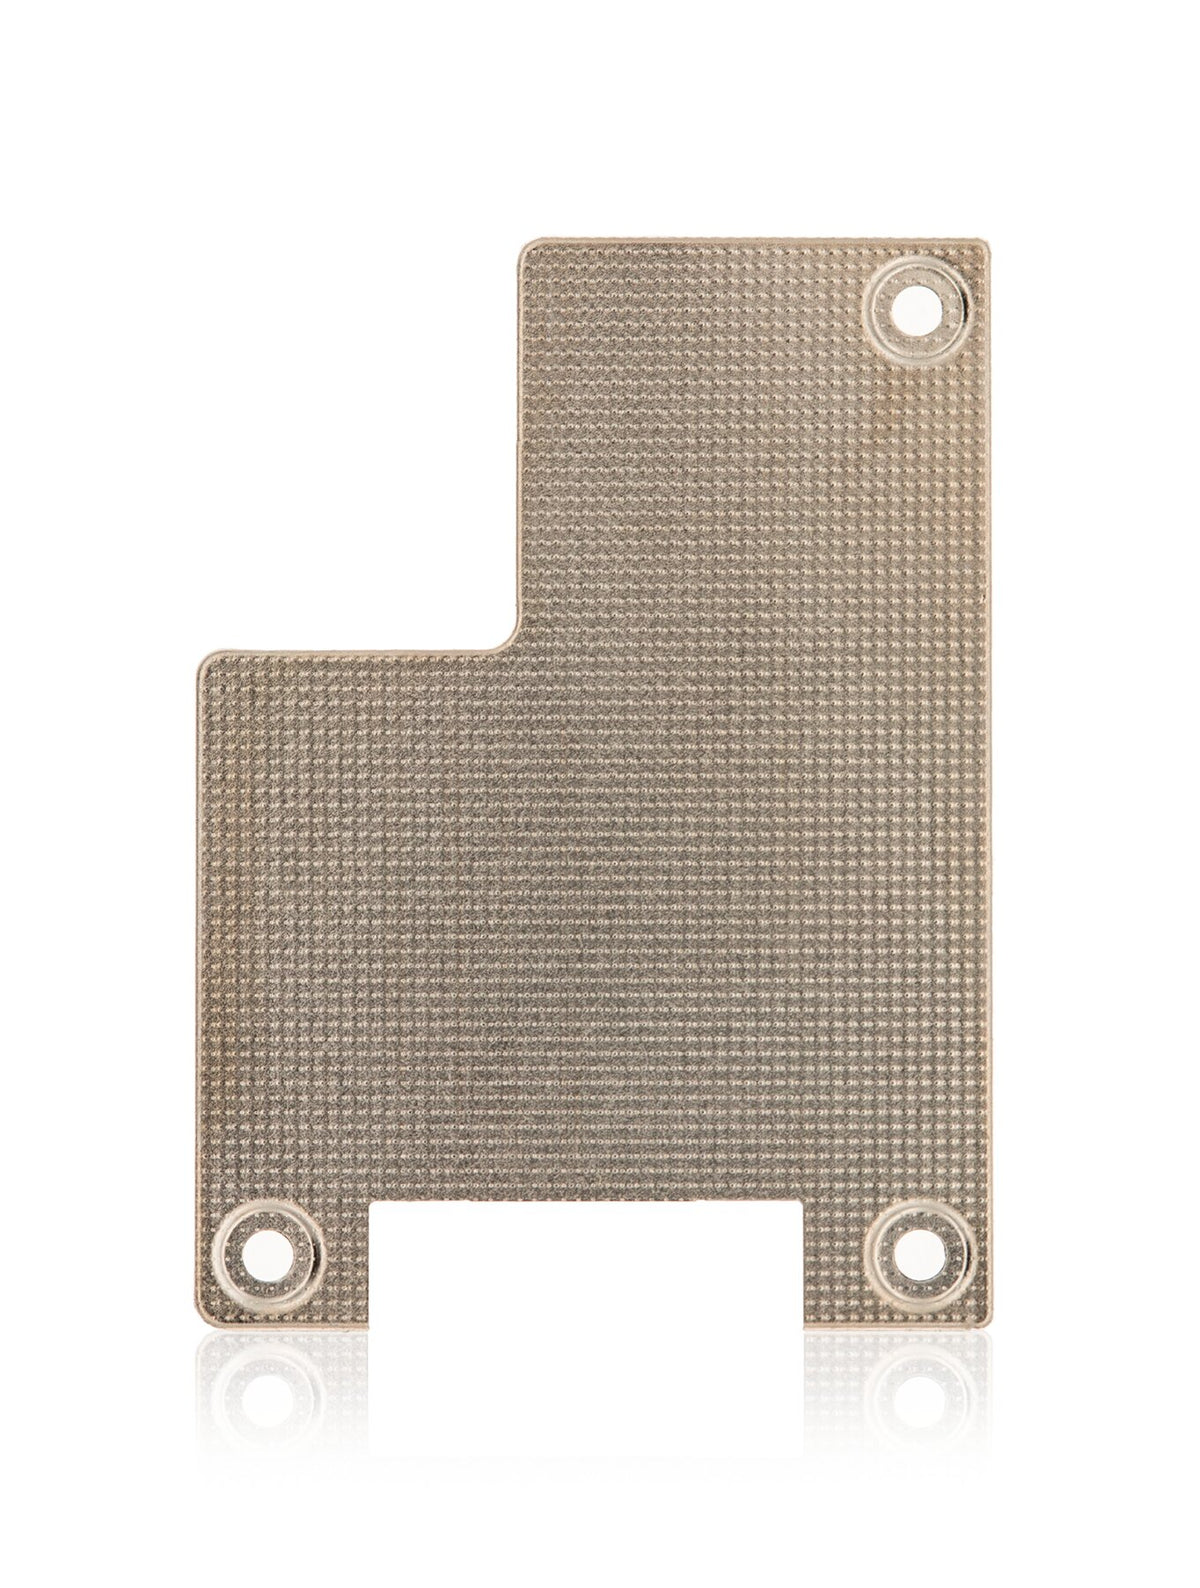 LCD FLEX CABLE HOLDING BRACKET (ON THE MAINBOARD) COMPATIBLE WITH IPAD PRO 9.7"